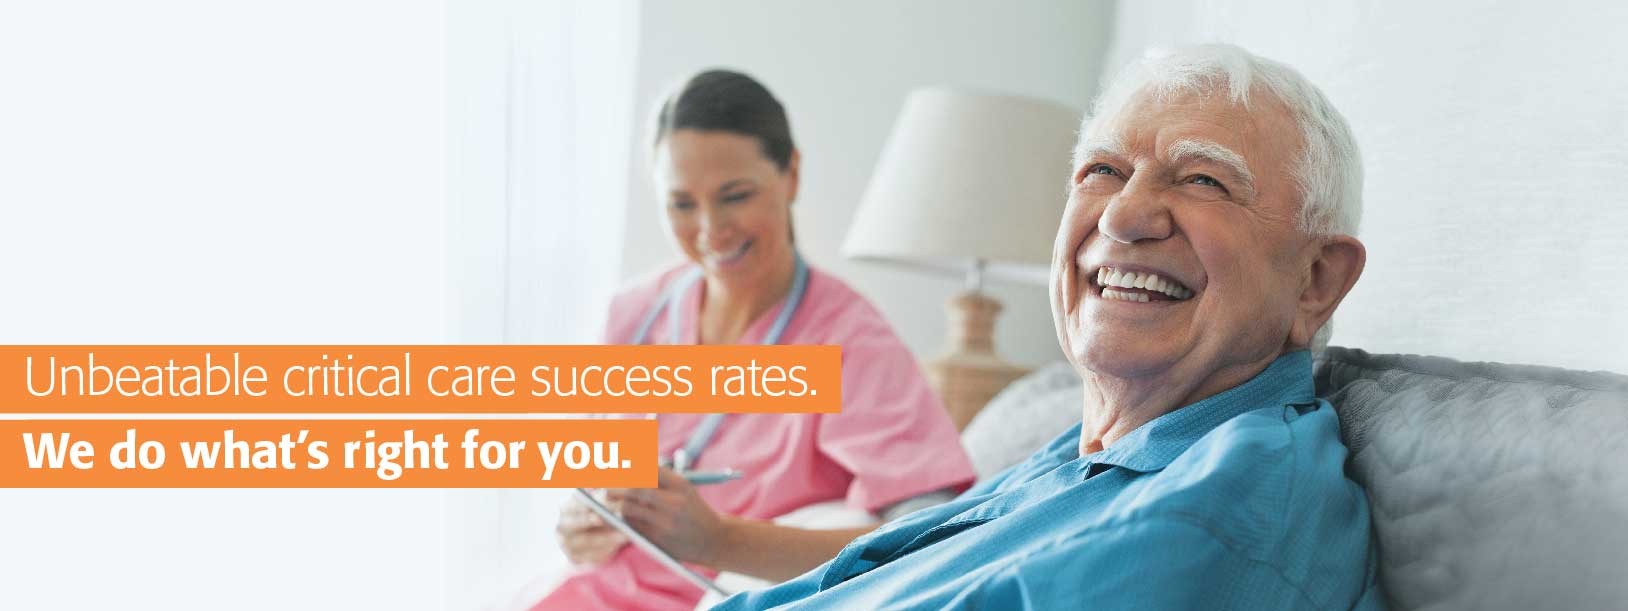 Unbeatable critical care success rates. We do what's right for you.